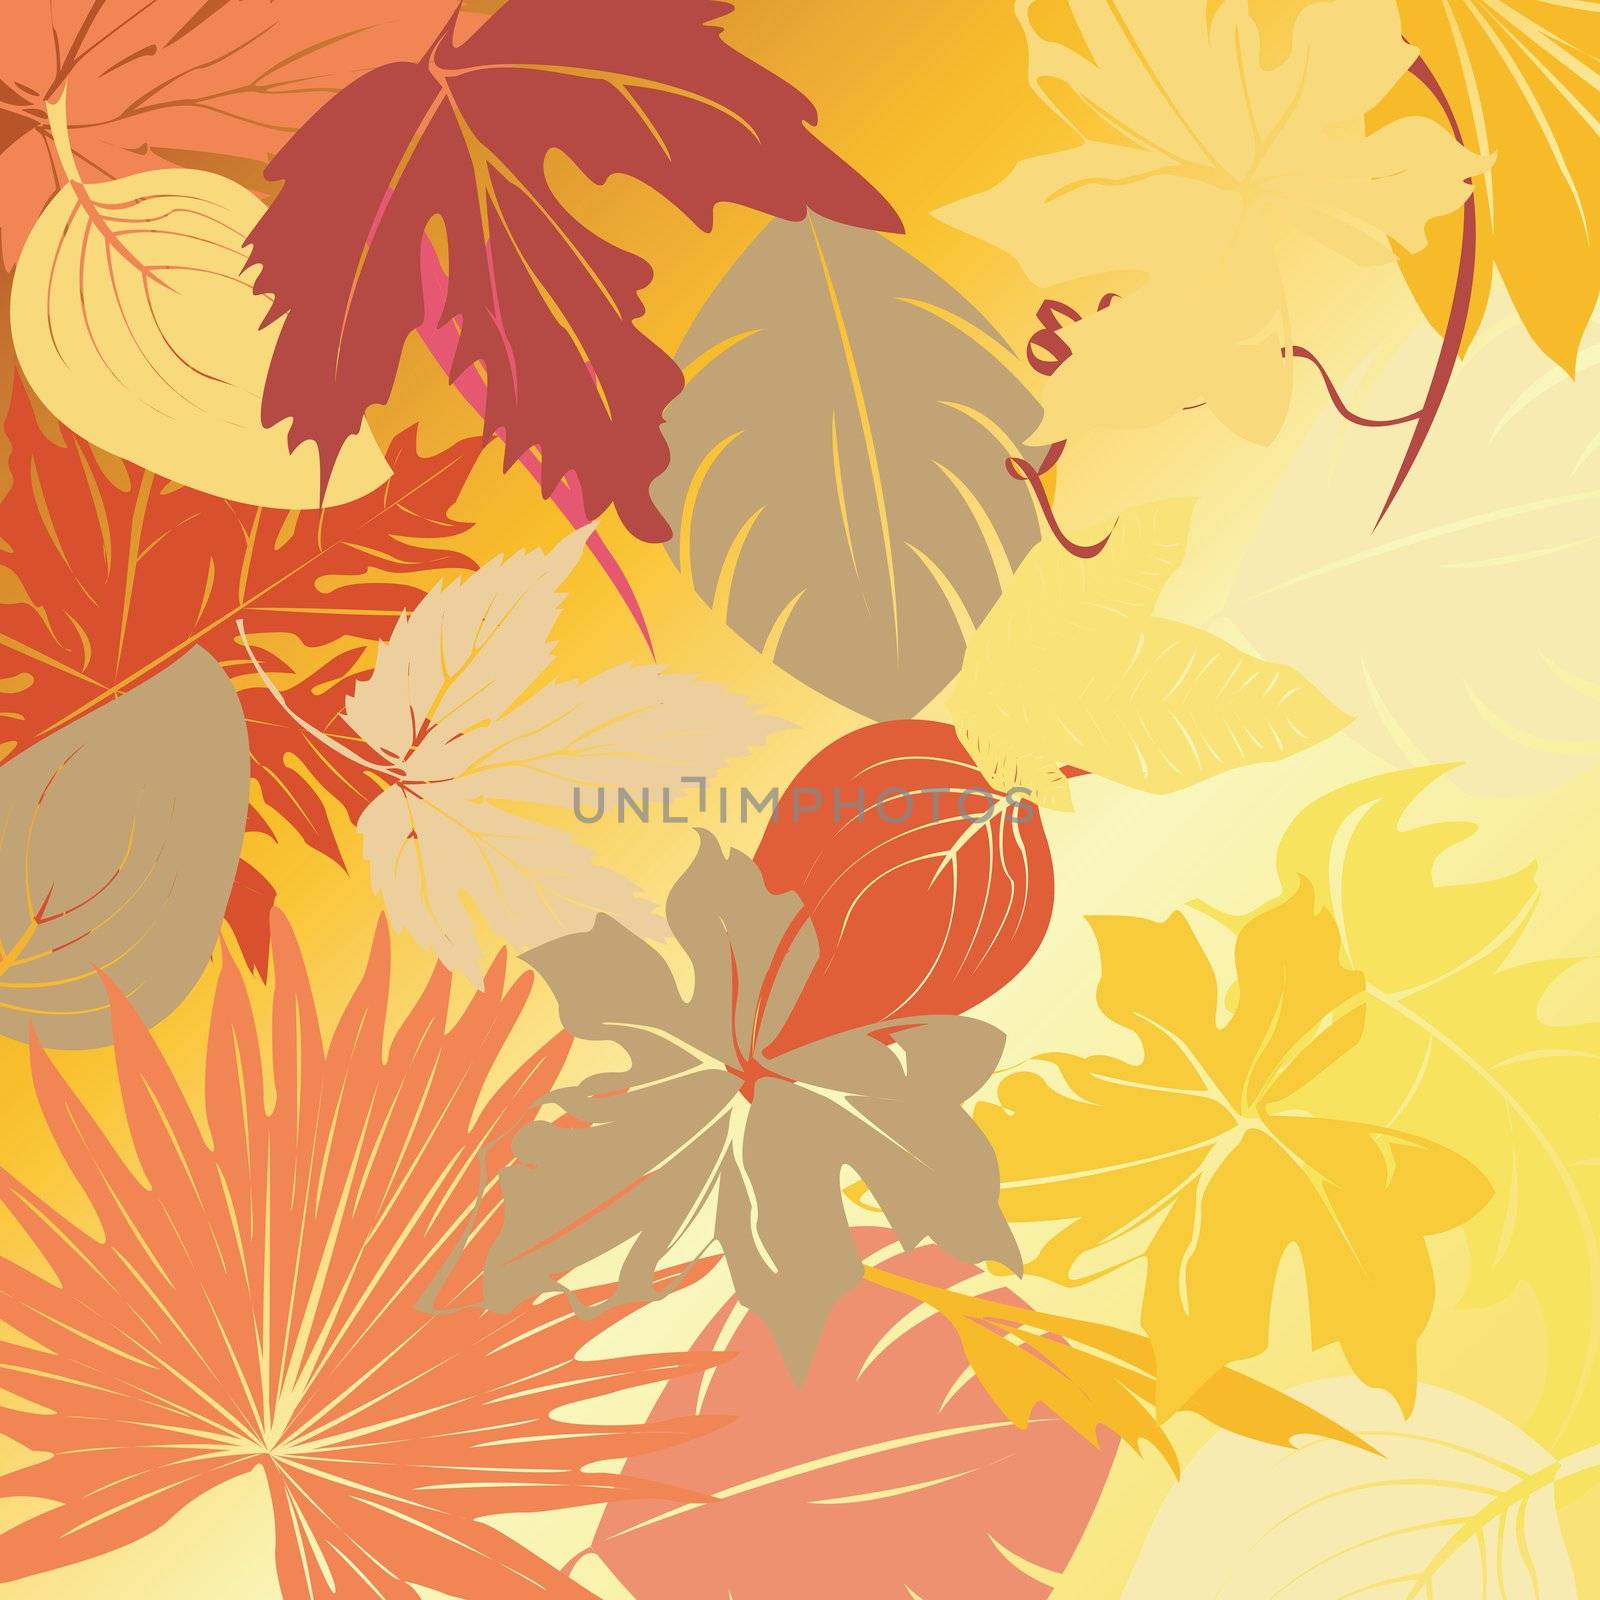 Autumn leaves background by Lirch